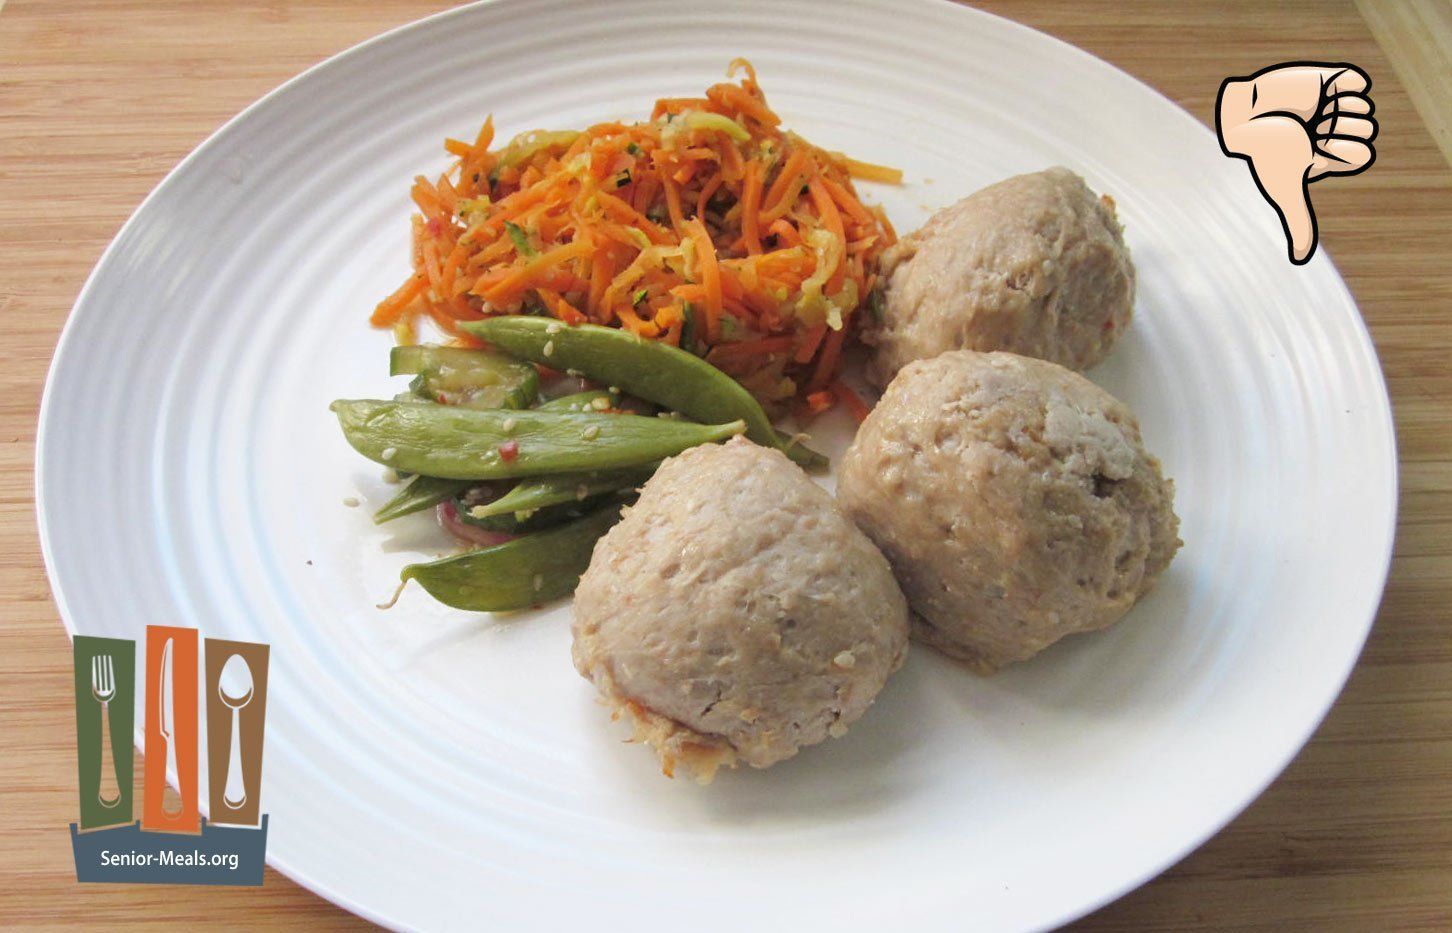 Vietnamese Pork and Shrimp Meatballs with Vegetable Vermicelli “Noodles” and Marinated Cucumbers, Radish and Snow Peas